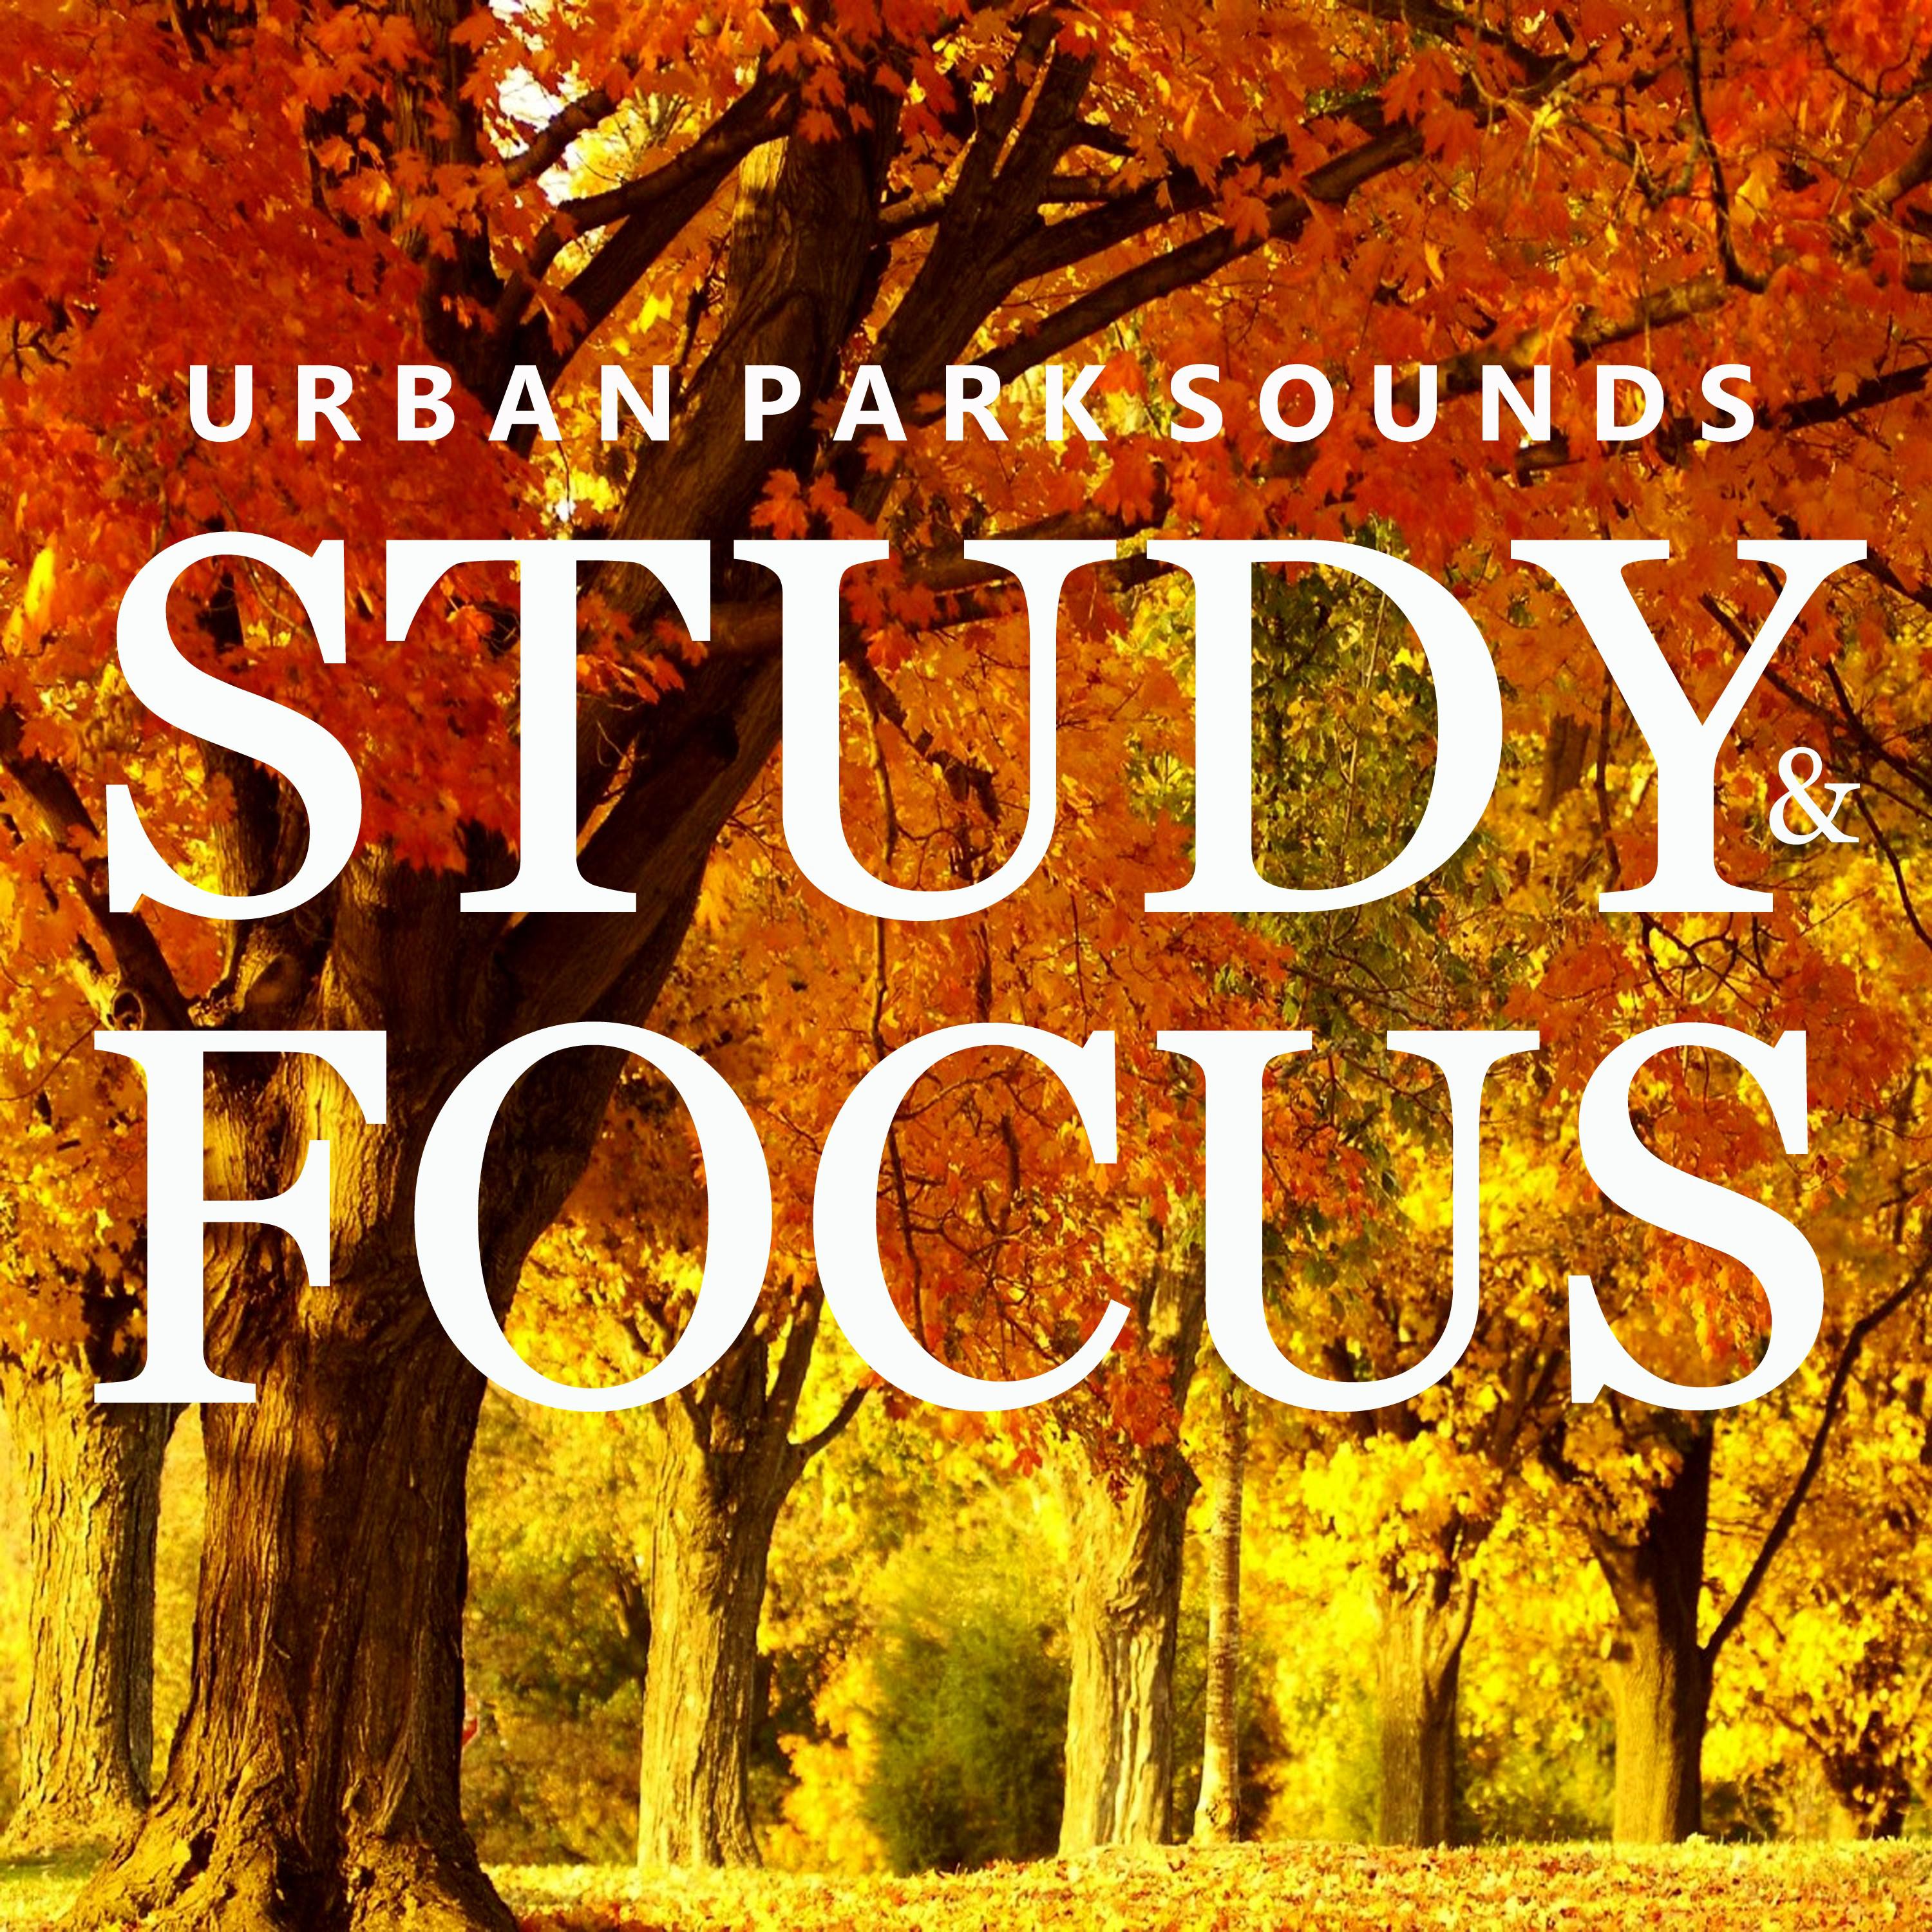 Urban Park Sounds for Studying, Pt. 42